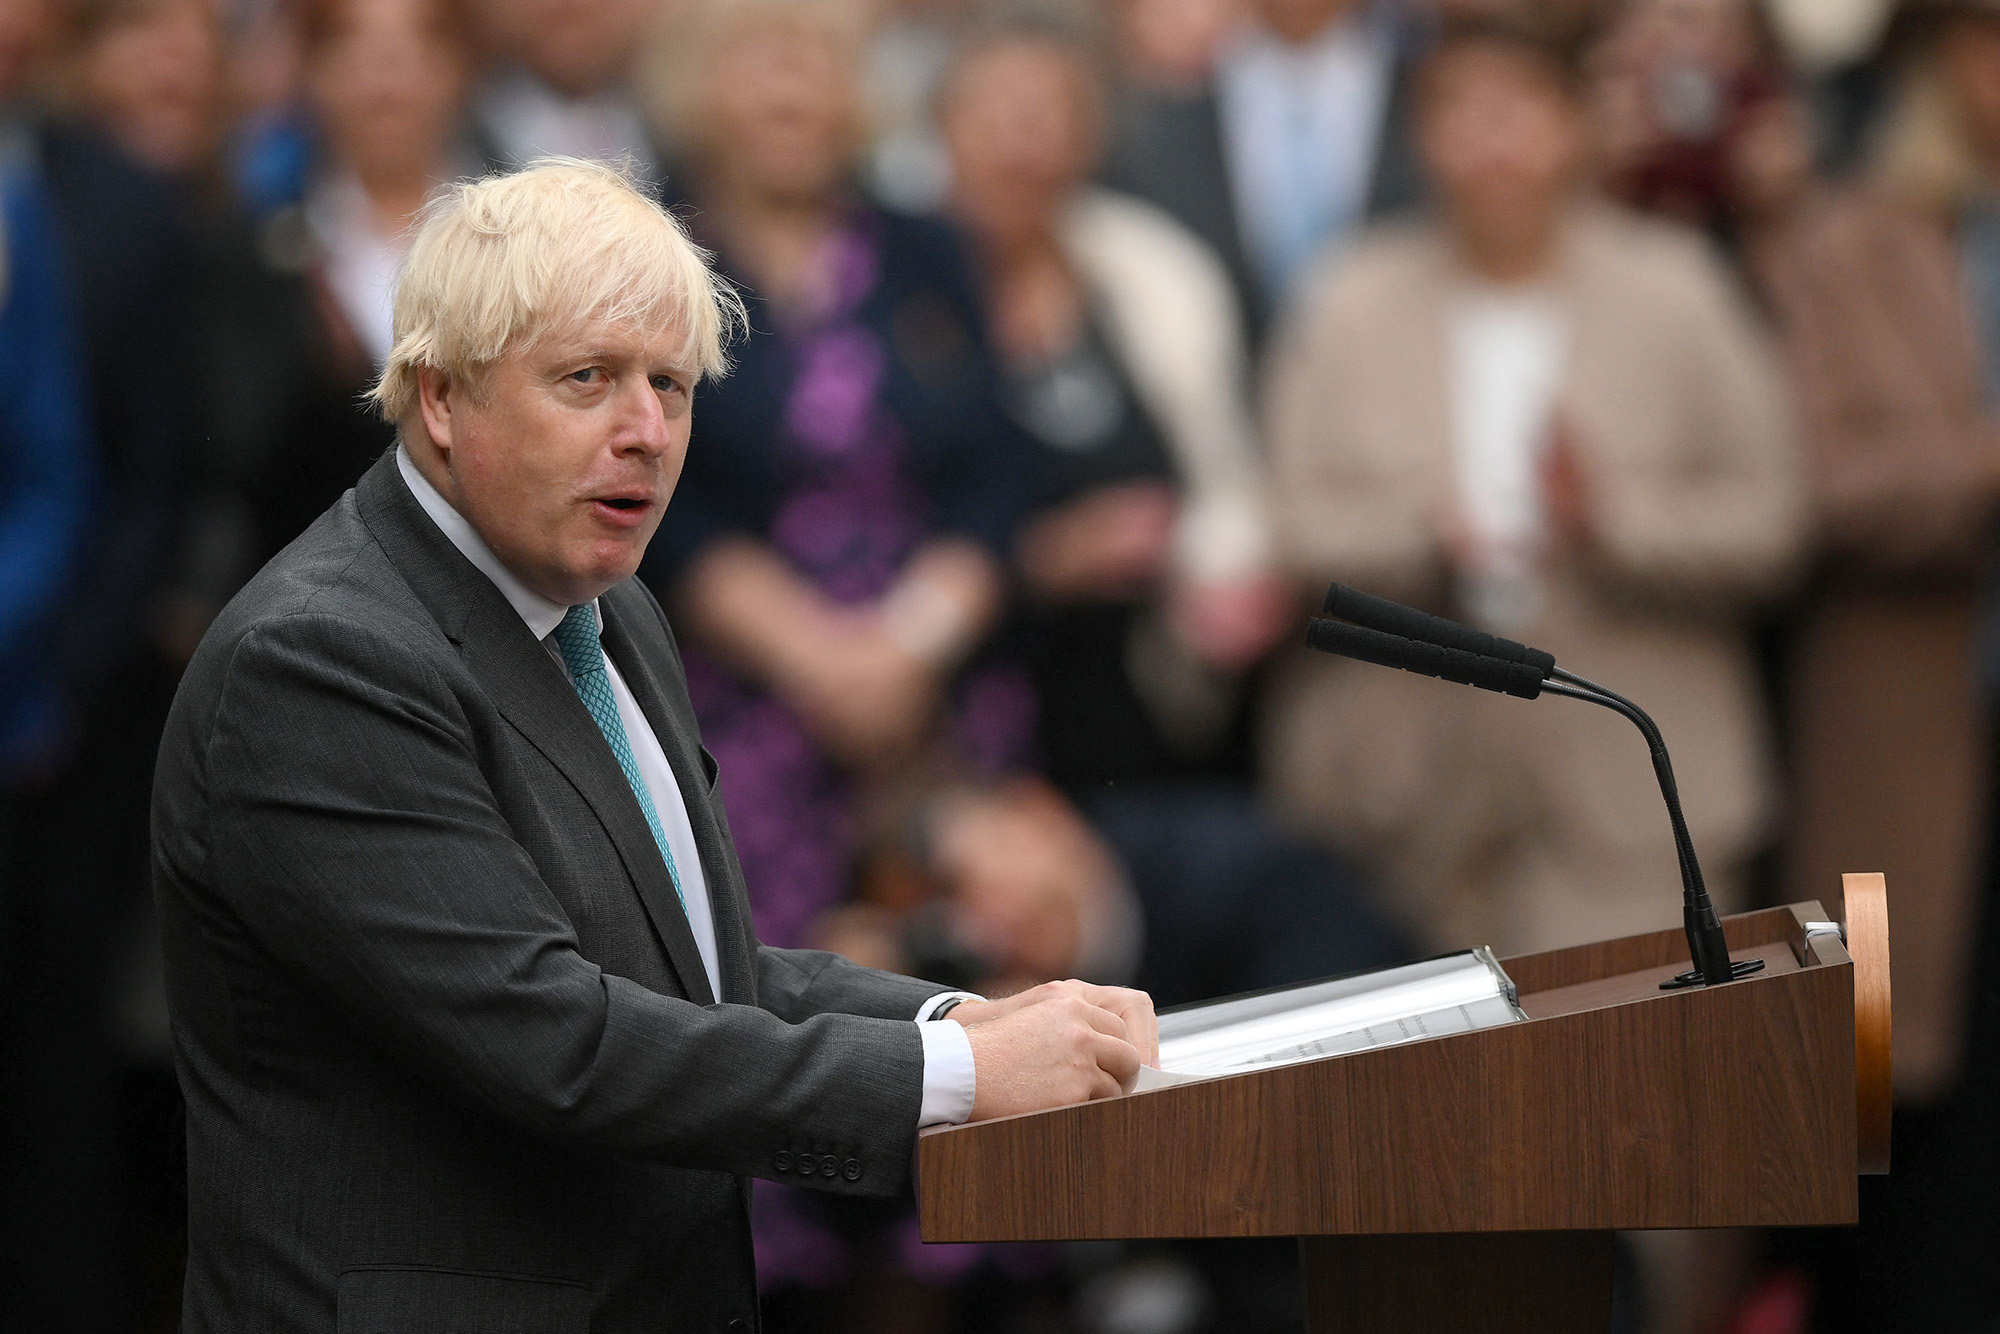 Britain's outgoing Prime Minister Boris Johnson delivers his final speech outside 10 Downing Street in central London, England on September 6.